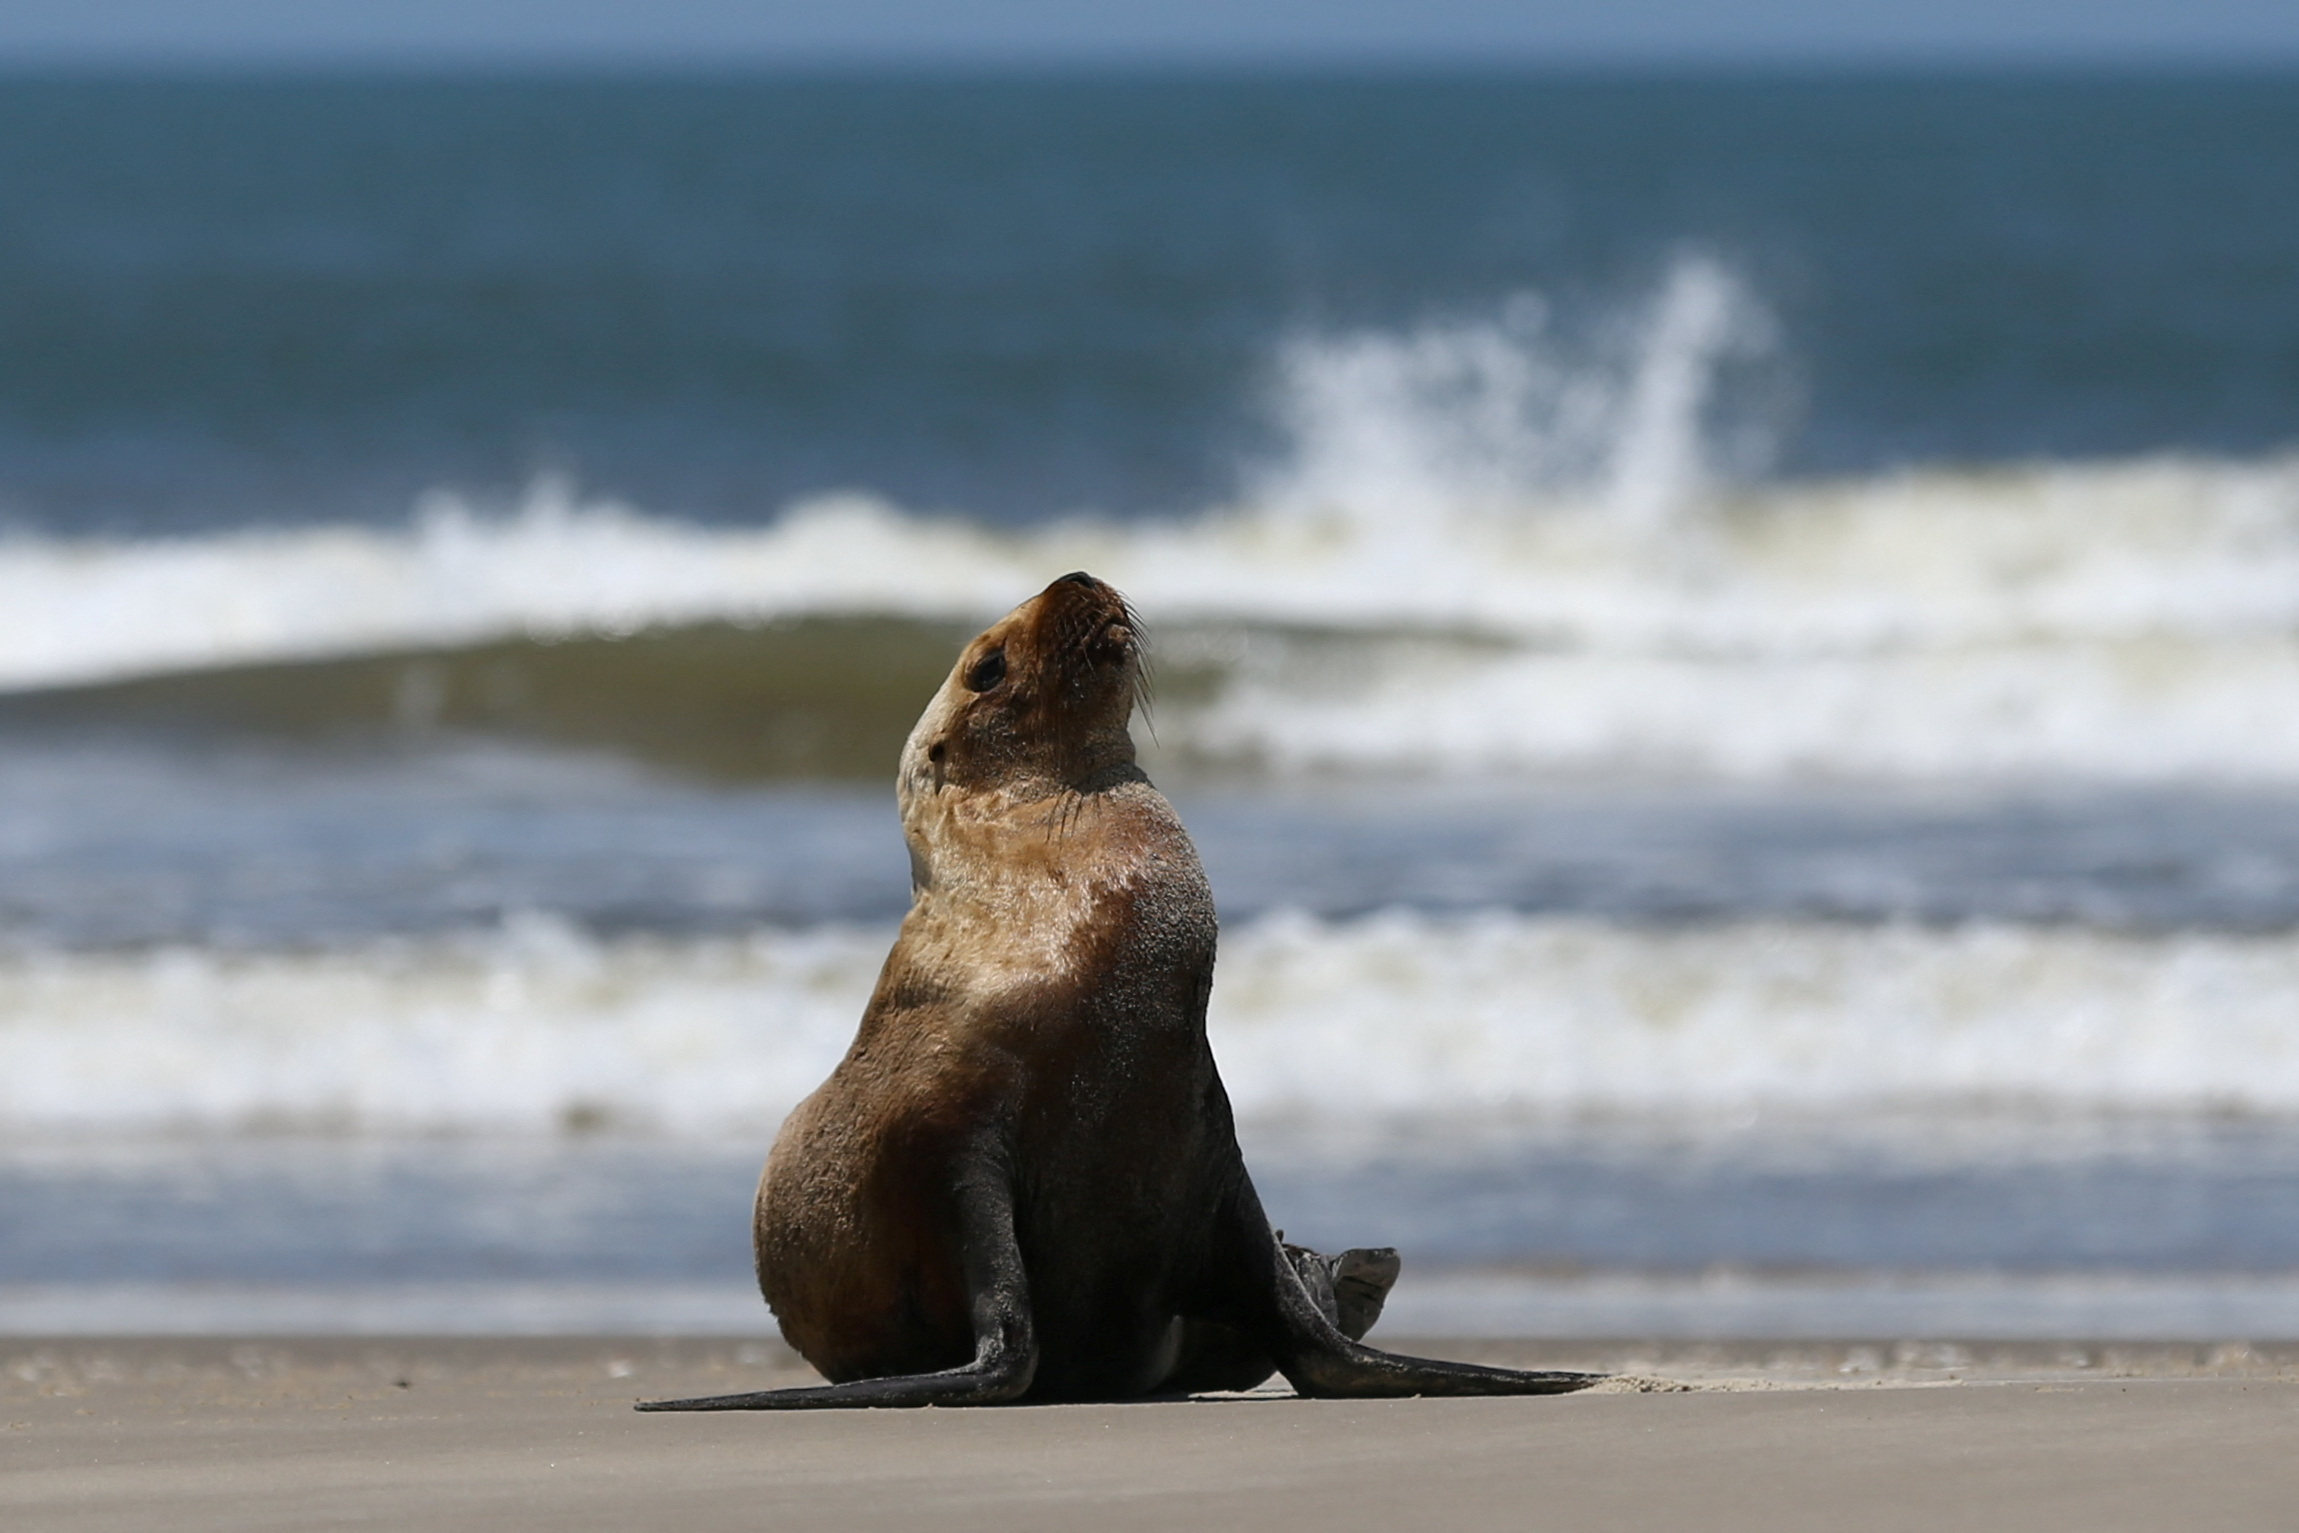 A sea lion with symptoms of bird flu sits on the coast of the Atlantic Ocean during an outbreak in Brazil. Photo: Reuters